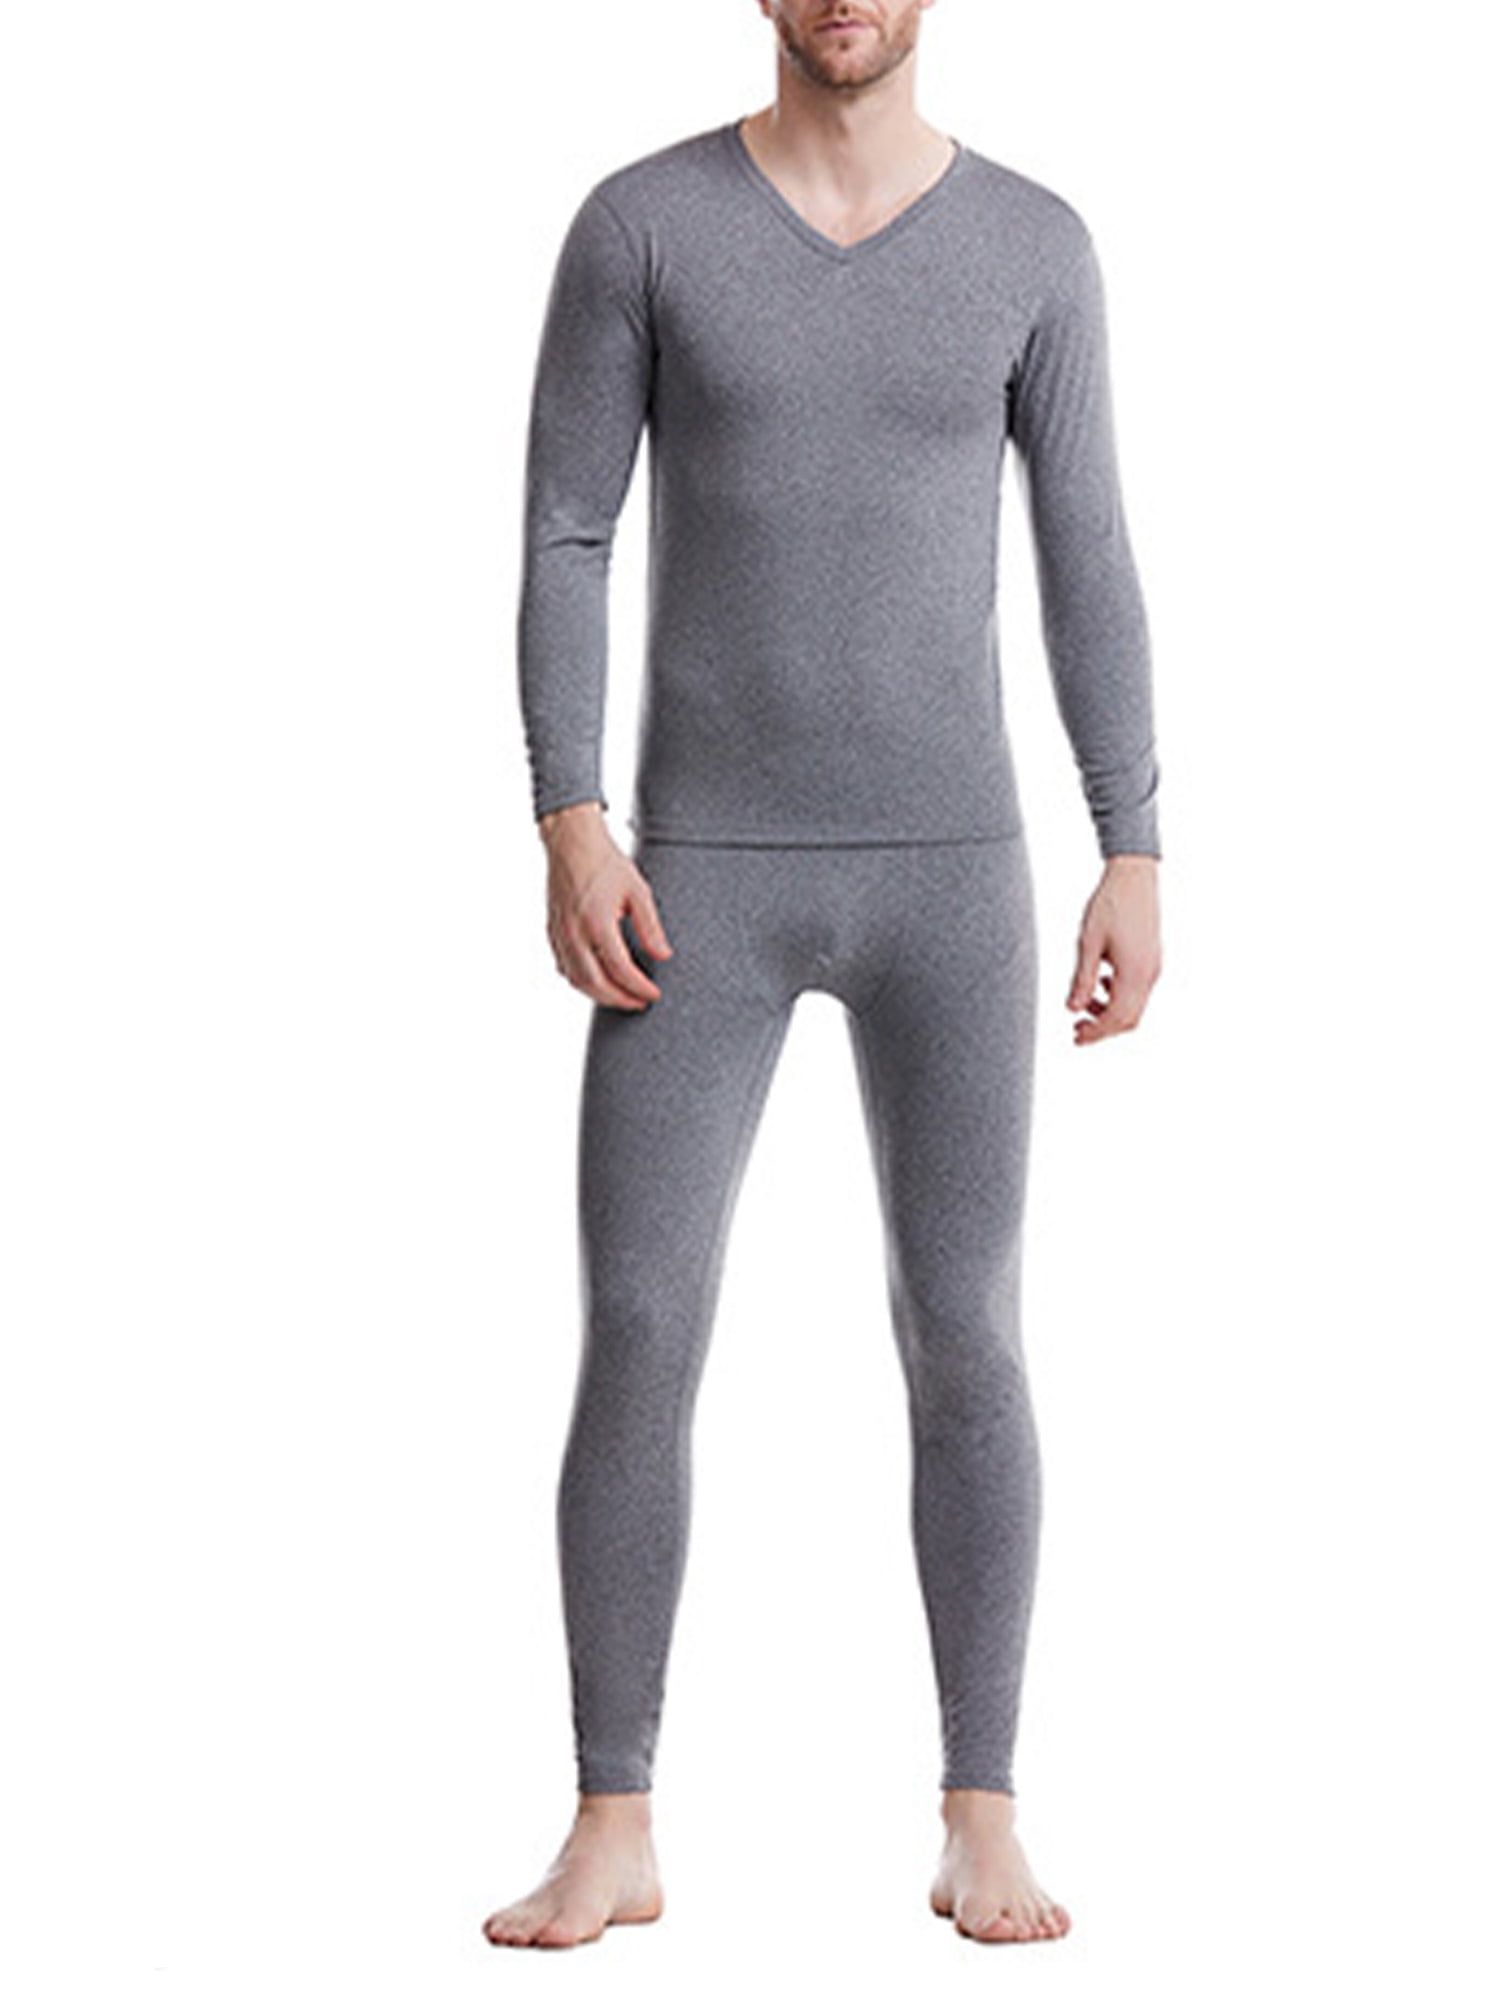 MHSLKER Men/'s One Piece Pajama Thermal Underwear Union Suits Long Sleeve Button Down Henley Adult Onesie Base Layer Grey